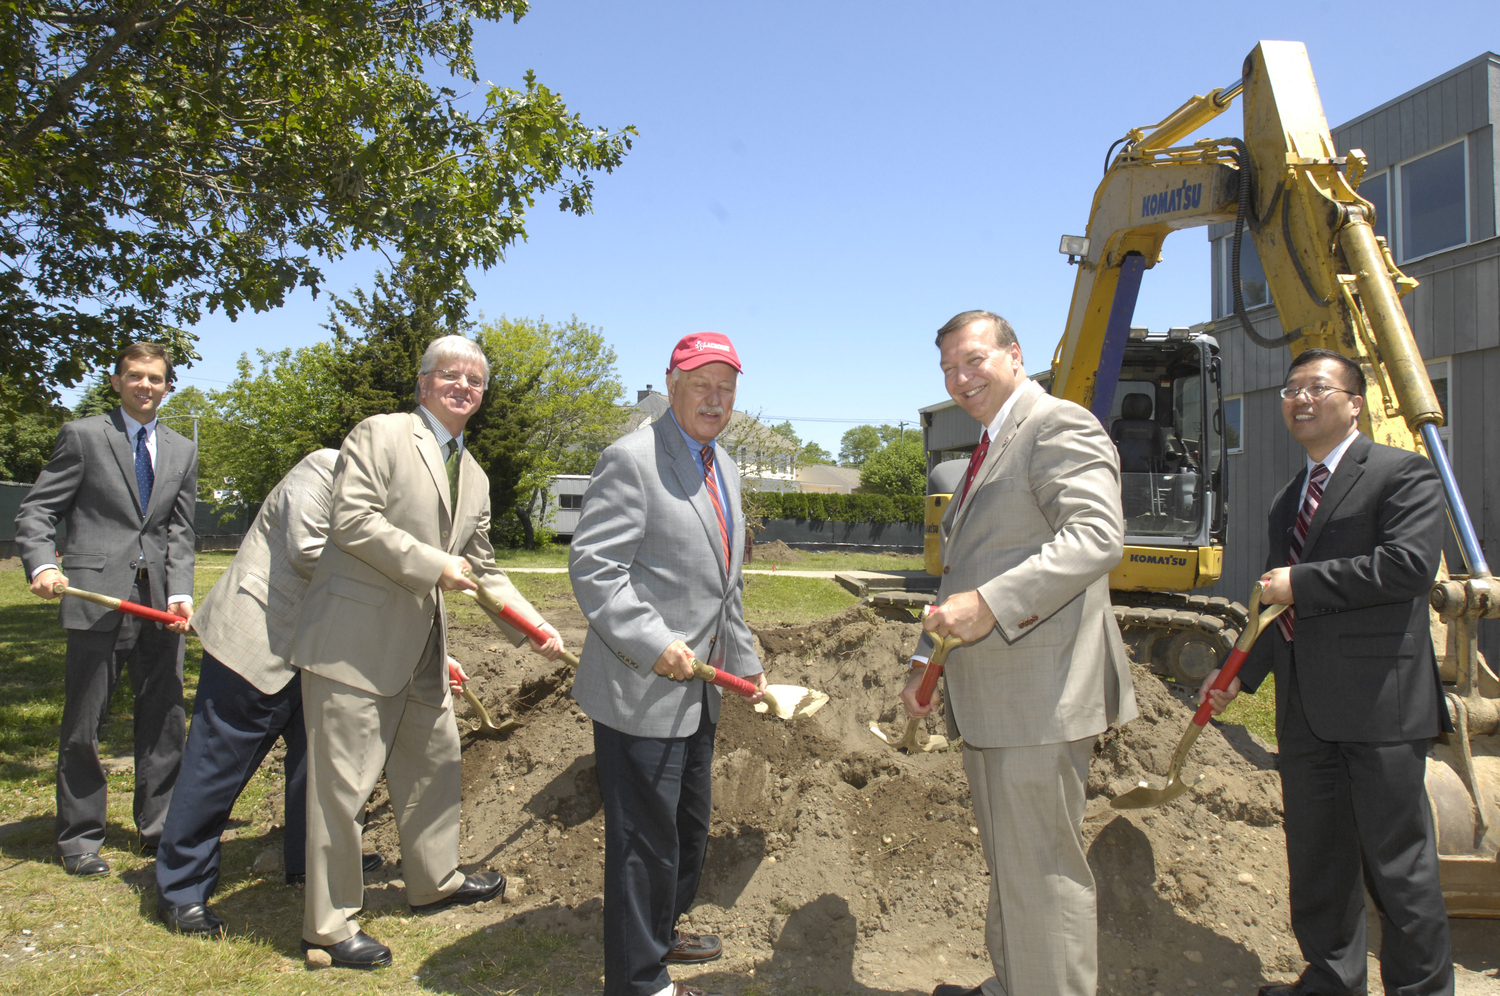 Ground is broken in May of 2012for an $8.3 million new Marine Science facility on Fort Pond Bay, at the site of the existing center. It would open in August 2013.   DANA SHAW